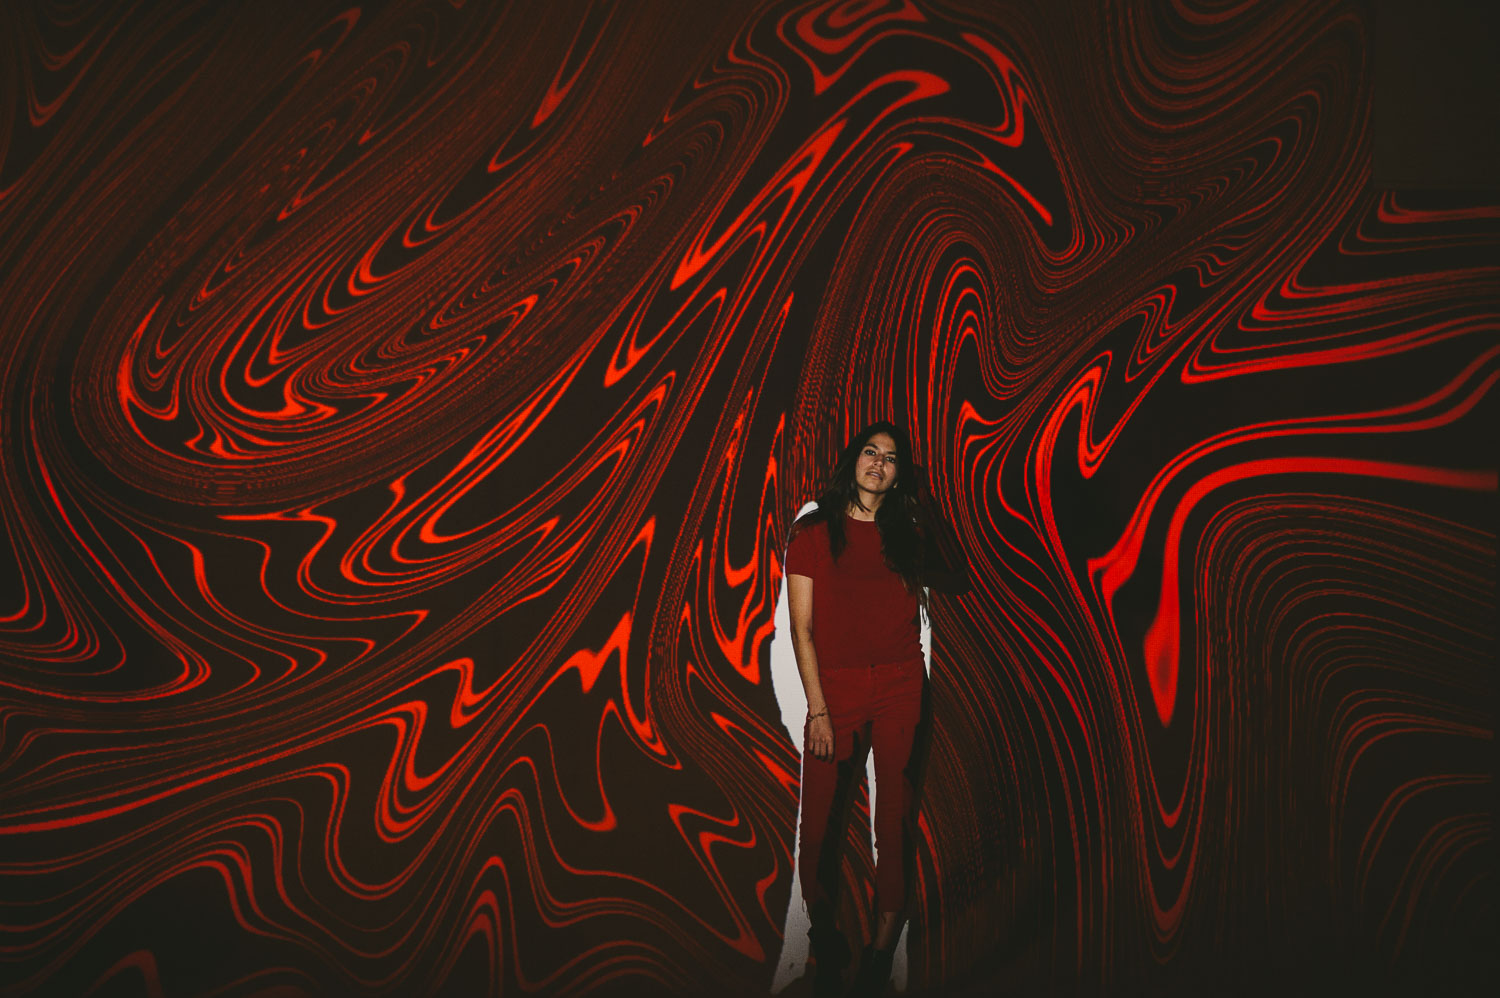 Artwalk self projection live art exhibit by C&I Studios with woman with long black hair in front of red artwork